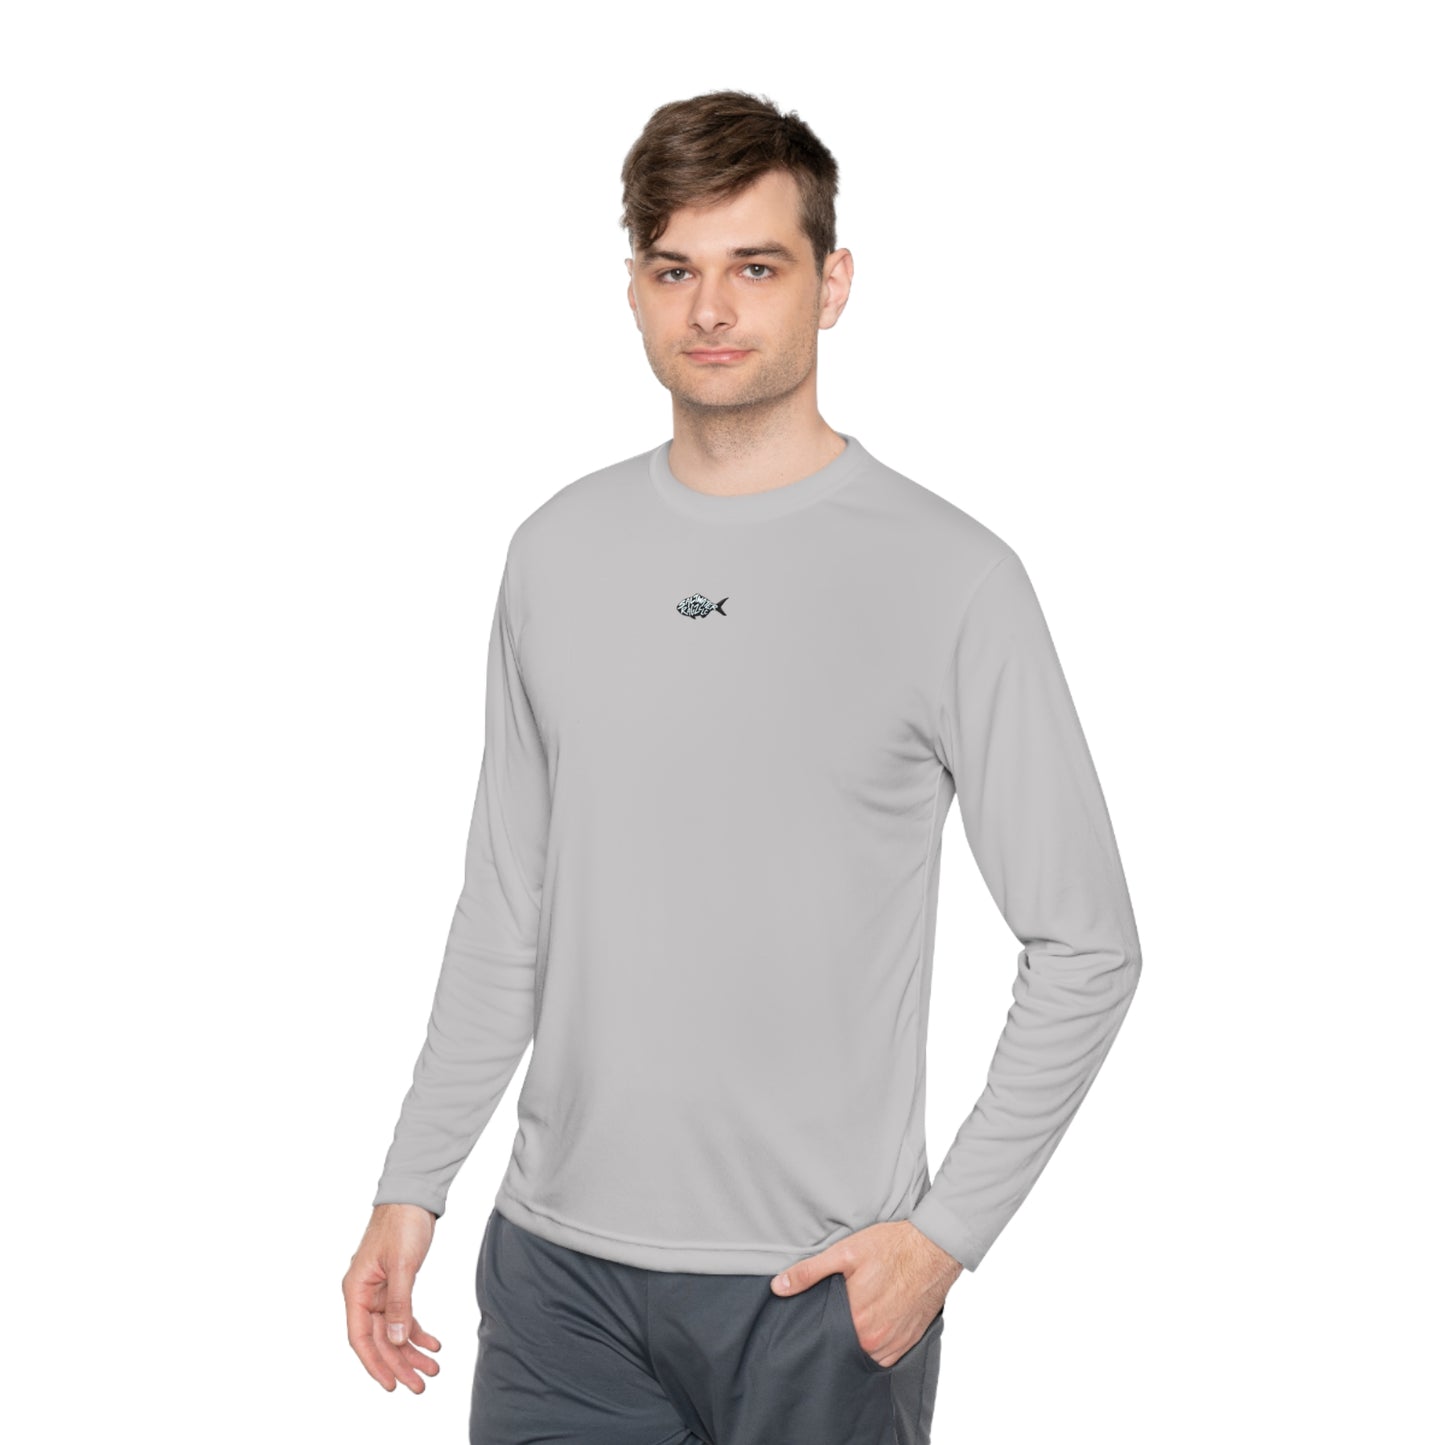 "WHALE PARTY" Moisture Wicking Long Sleeve Tee